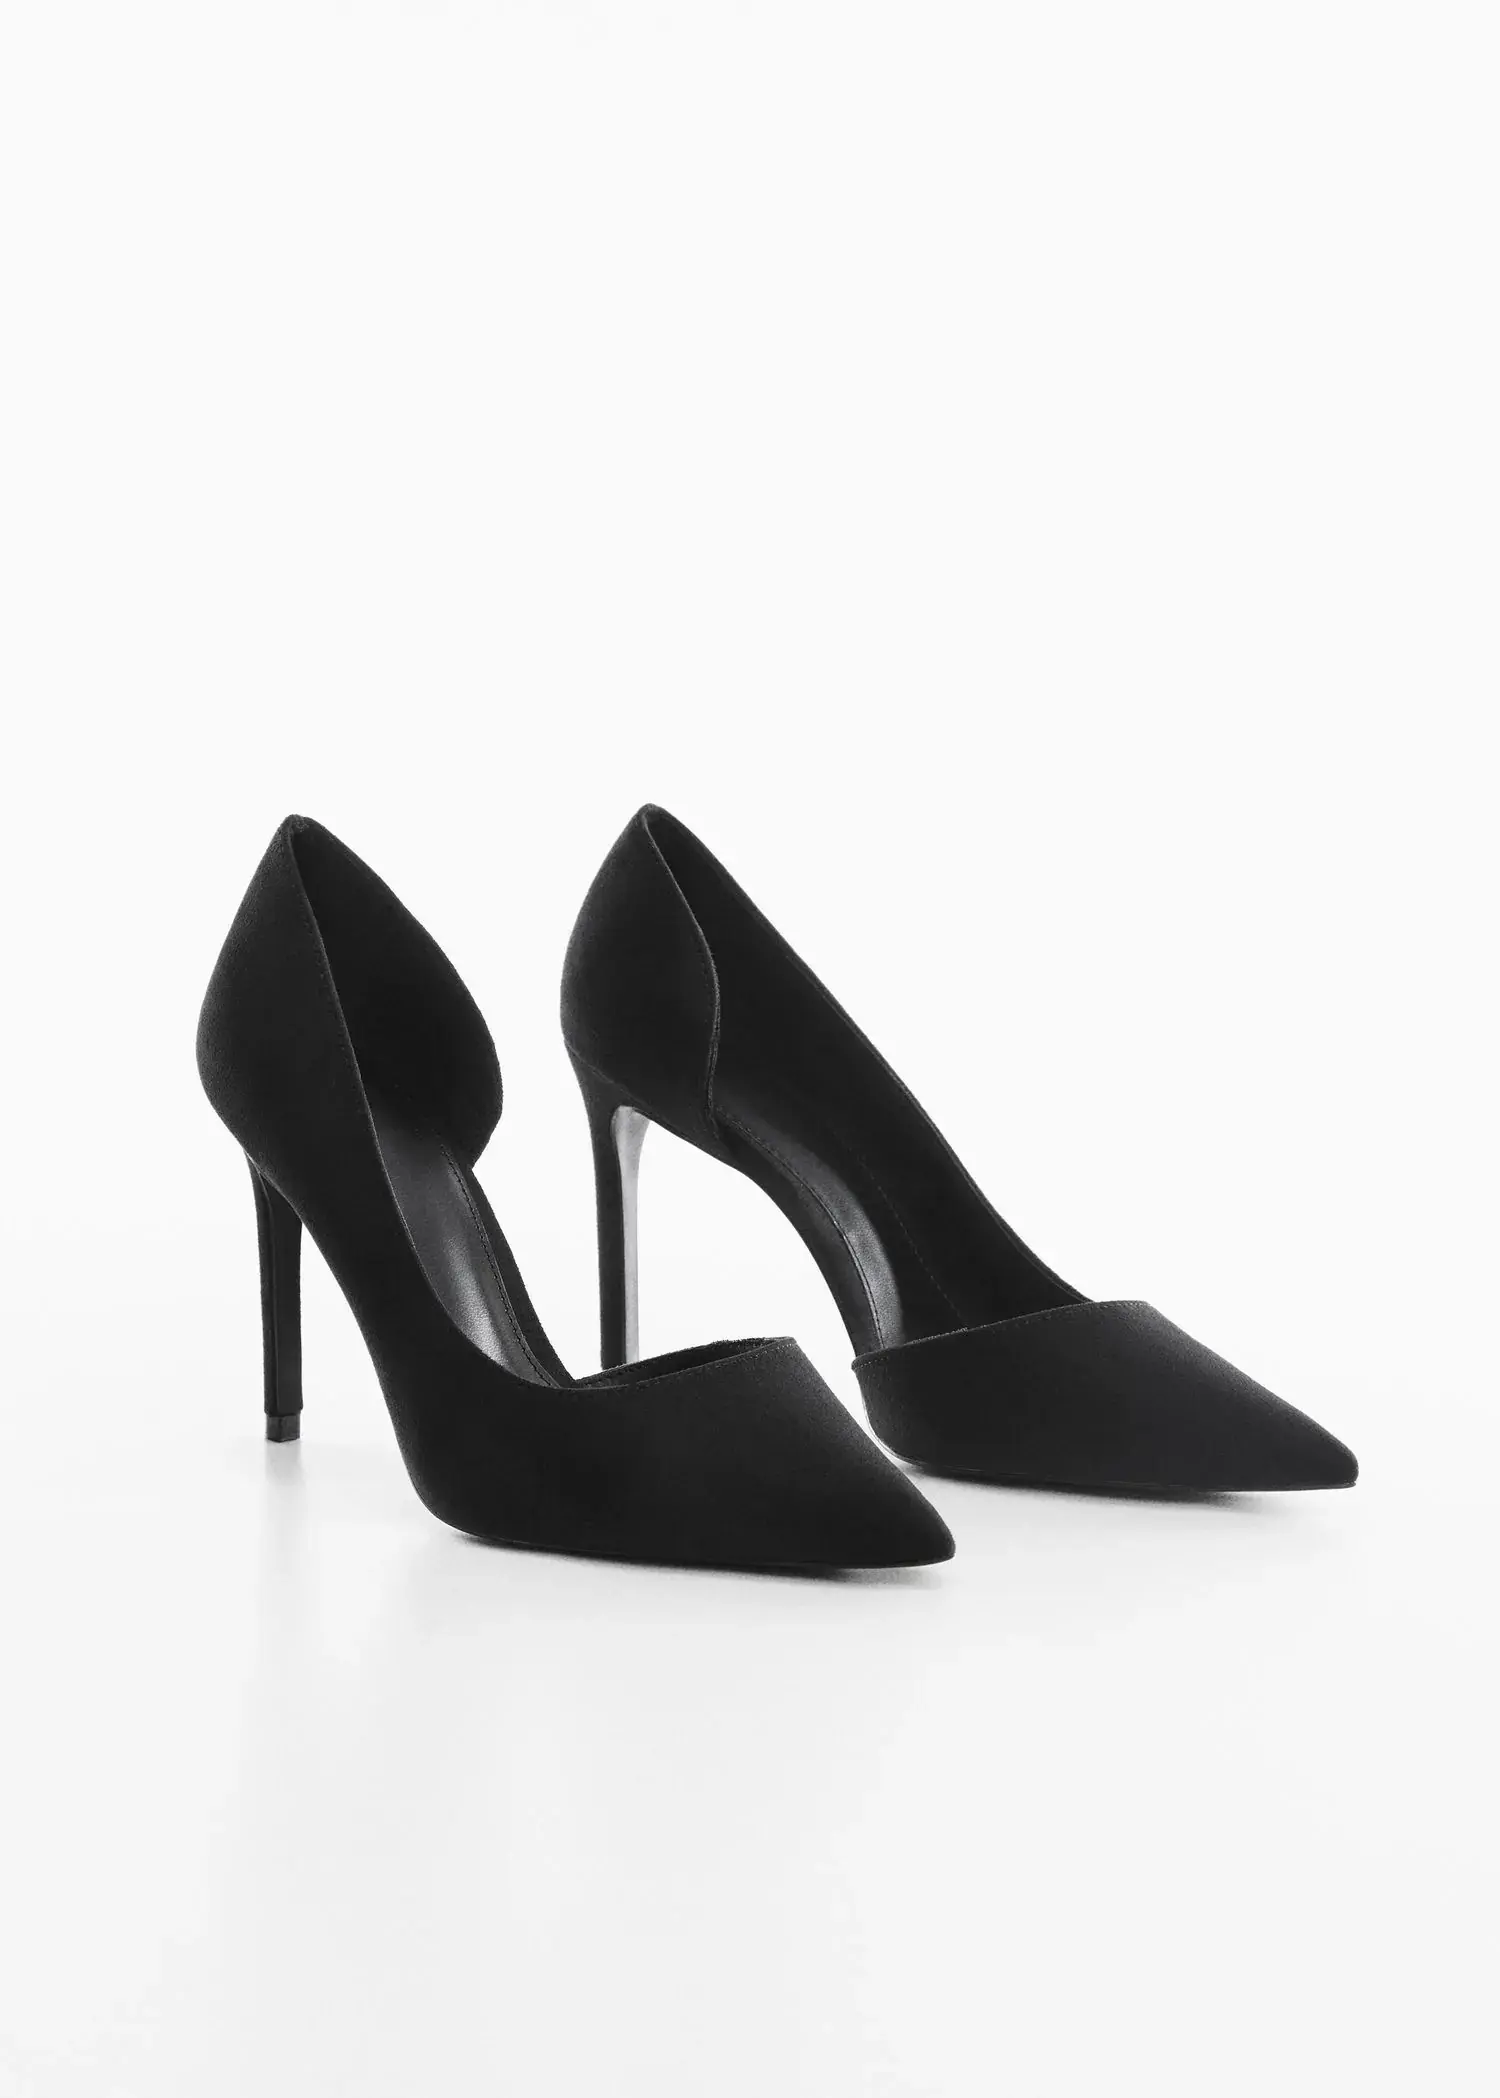 Mango Asymmetrical heeled shoes. a pair of black high heels on a white surface. 